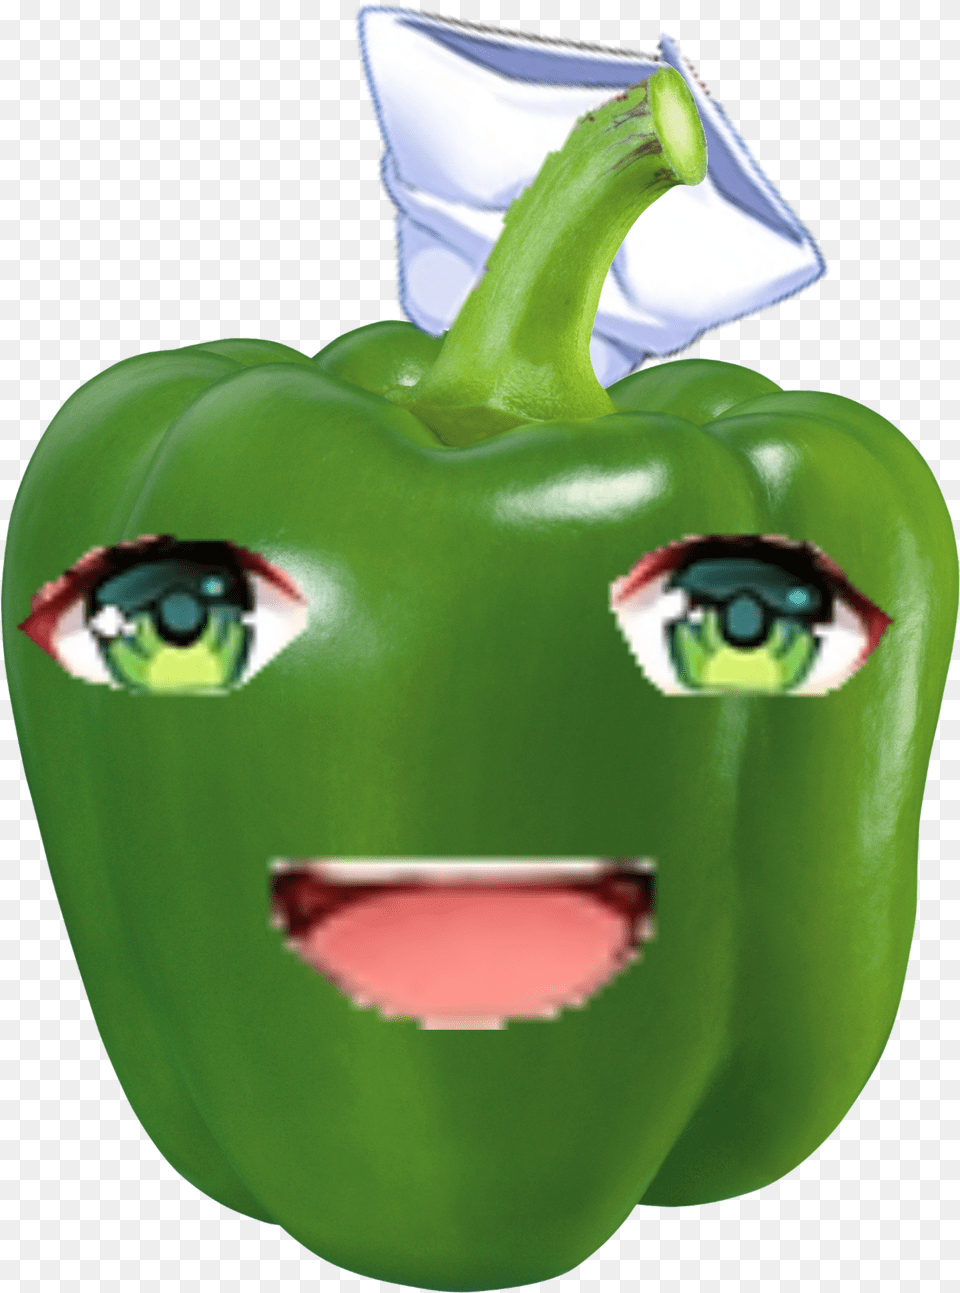 Download Just Paprika Annoying Orange Spicy, Bell Pepper, Produce, Plant, Pepper Free Transparent Png